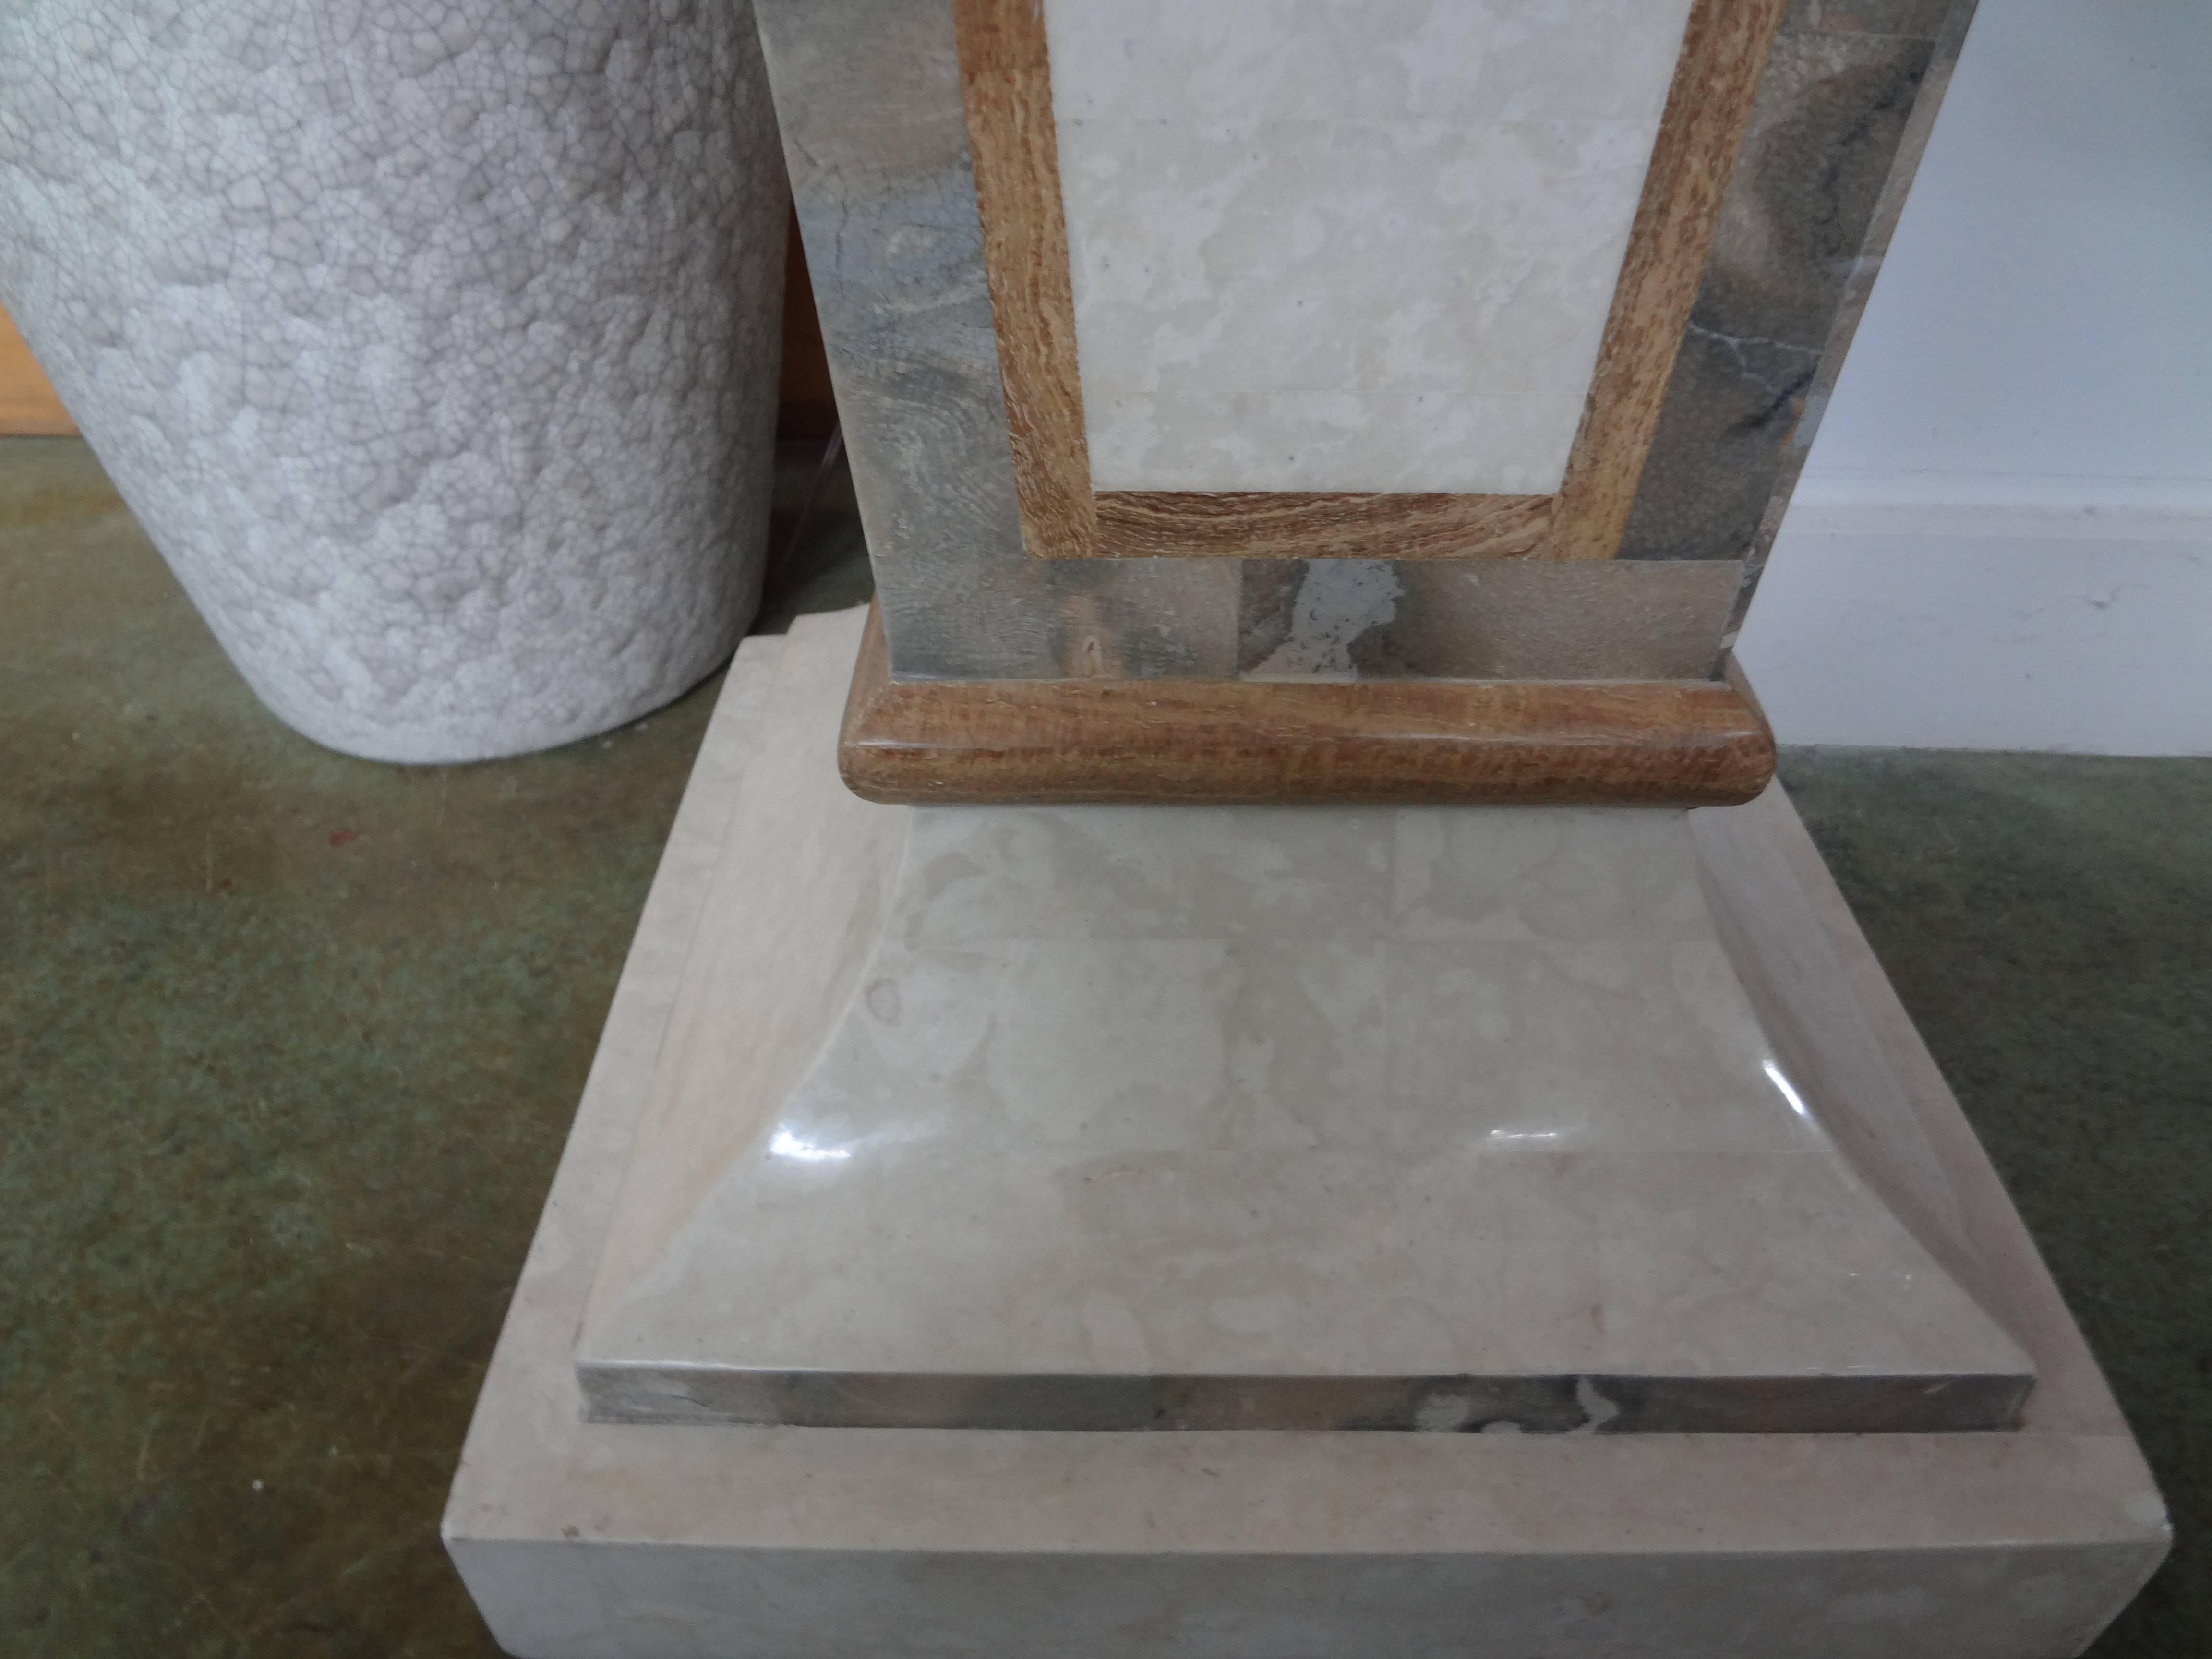 Large tessellated stone Art Deco style geometric pedestal, possibly Maitland-Smith.
This Hollywood Regency pedestal would work well in a variety of interiors to display a sculpture, bust or as a plant stand.
Top dimensions: 11 inches x 11